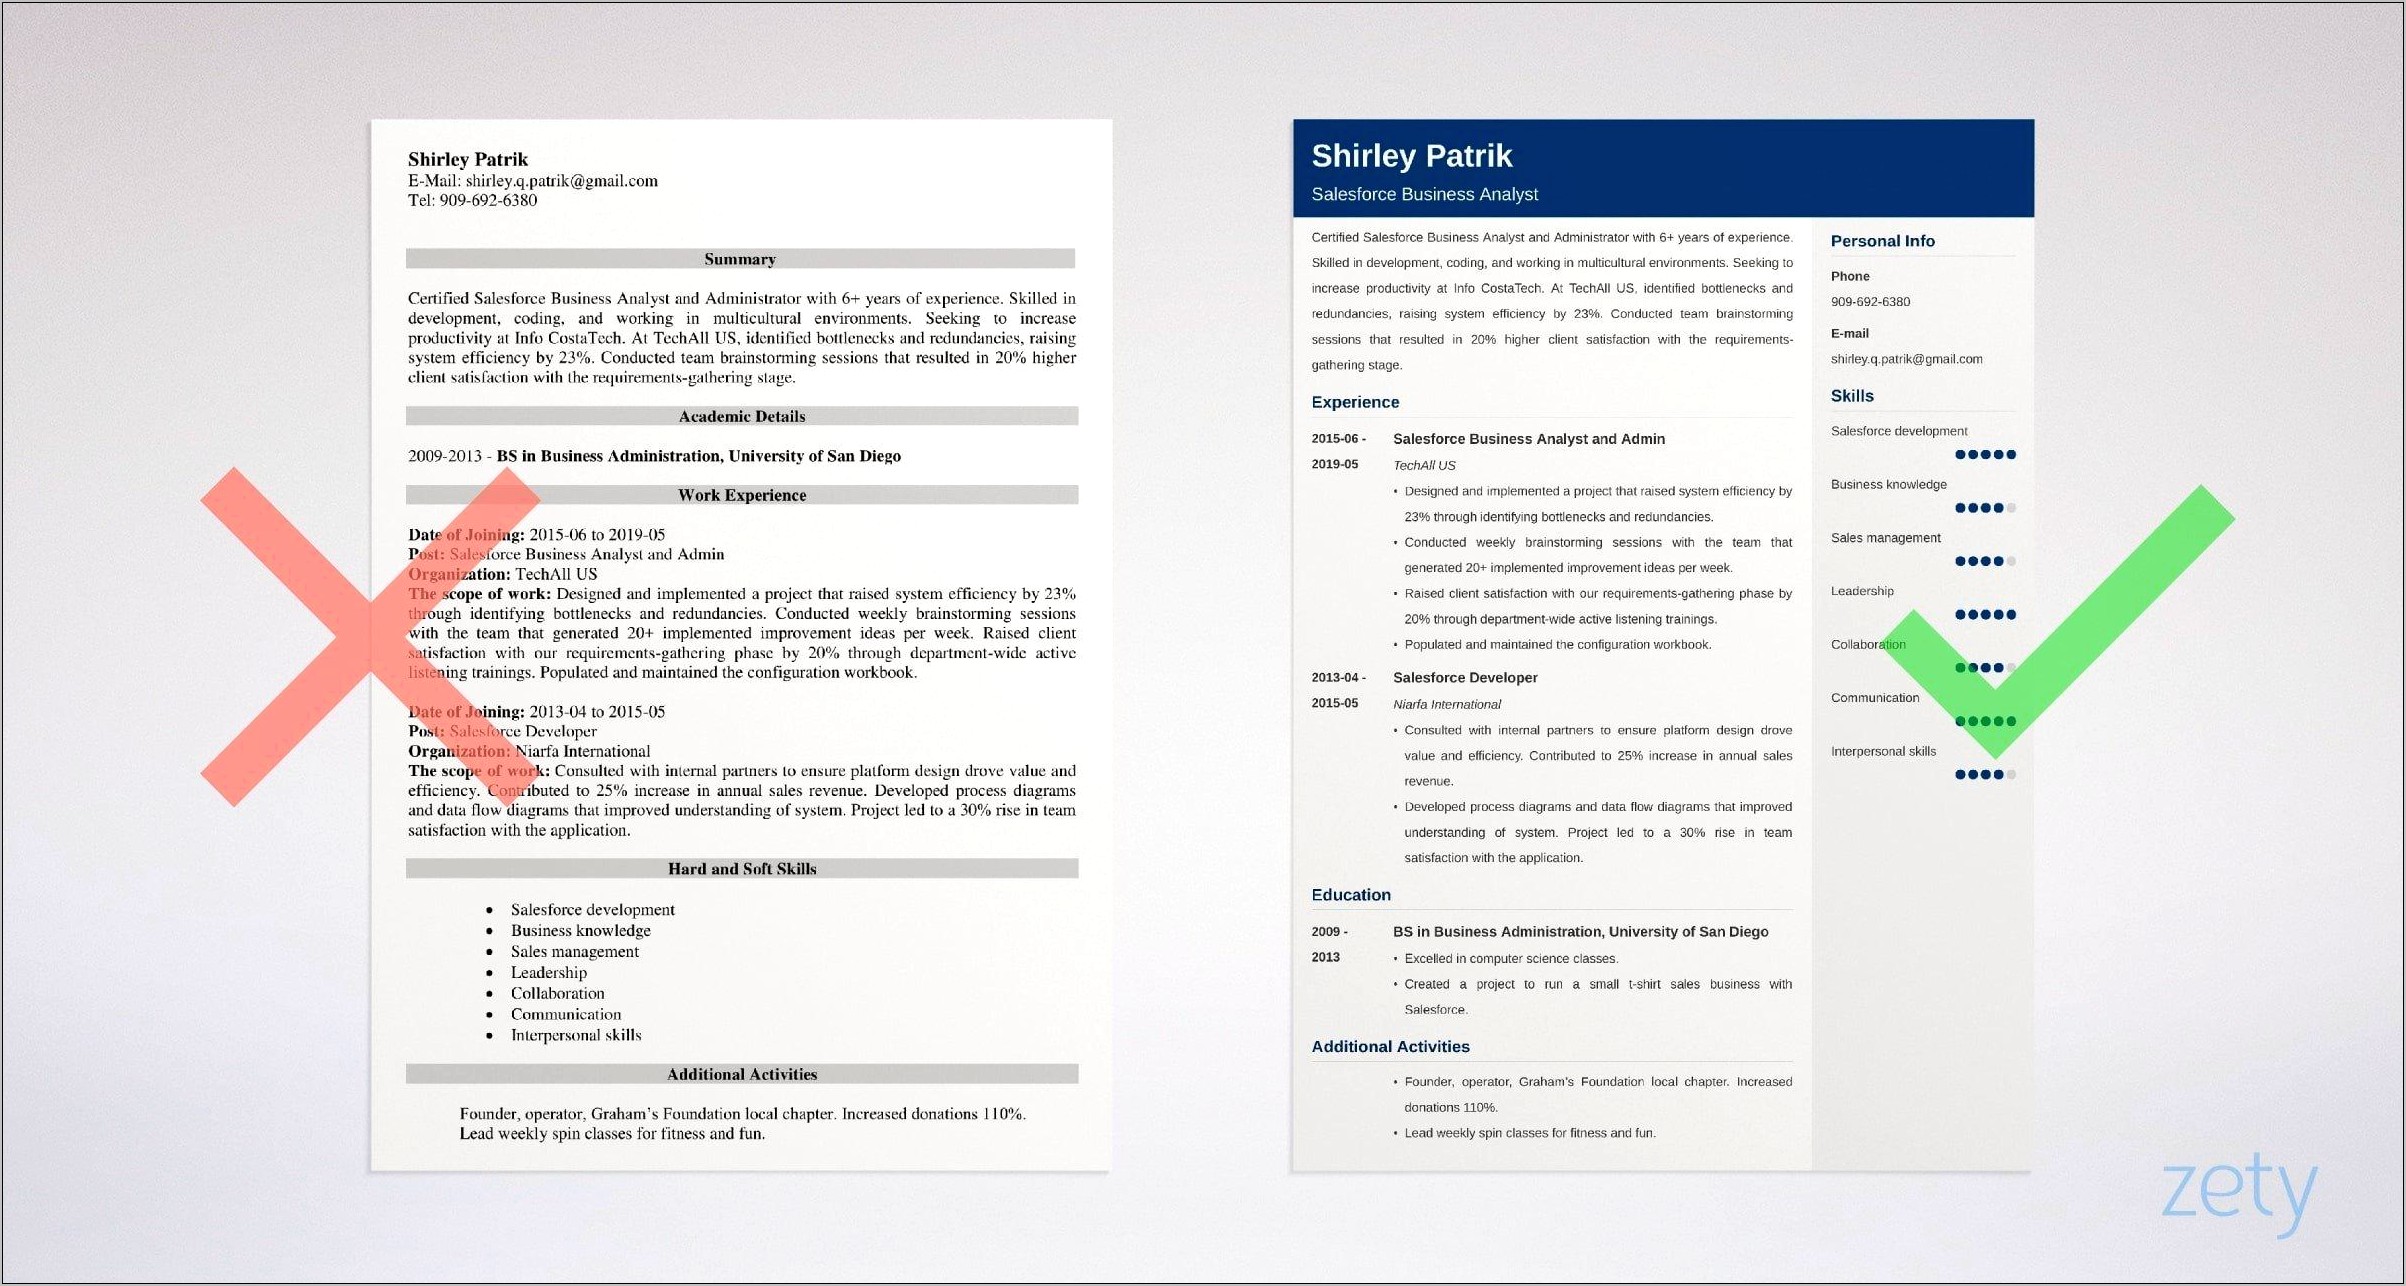 Resume Sample With Salesforce Experience